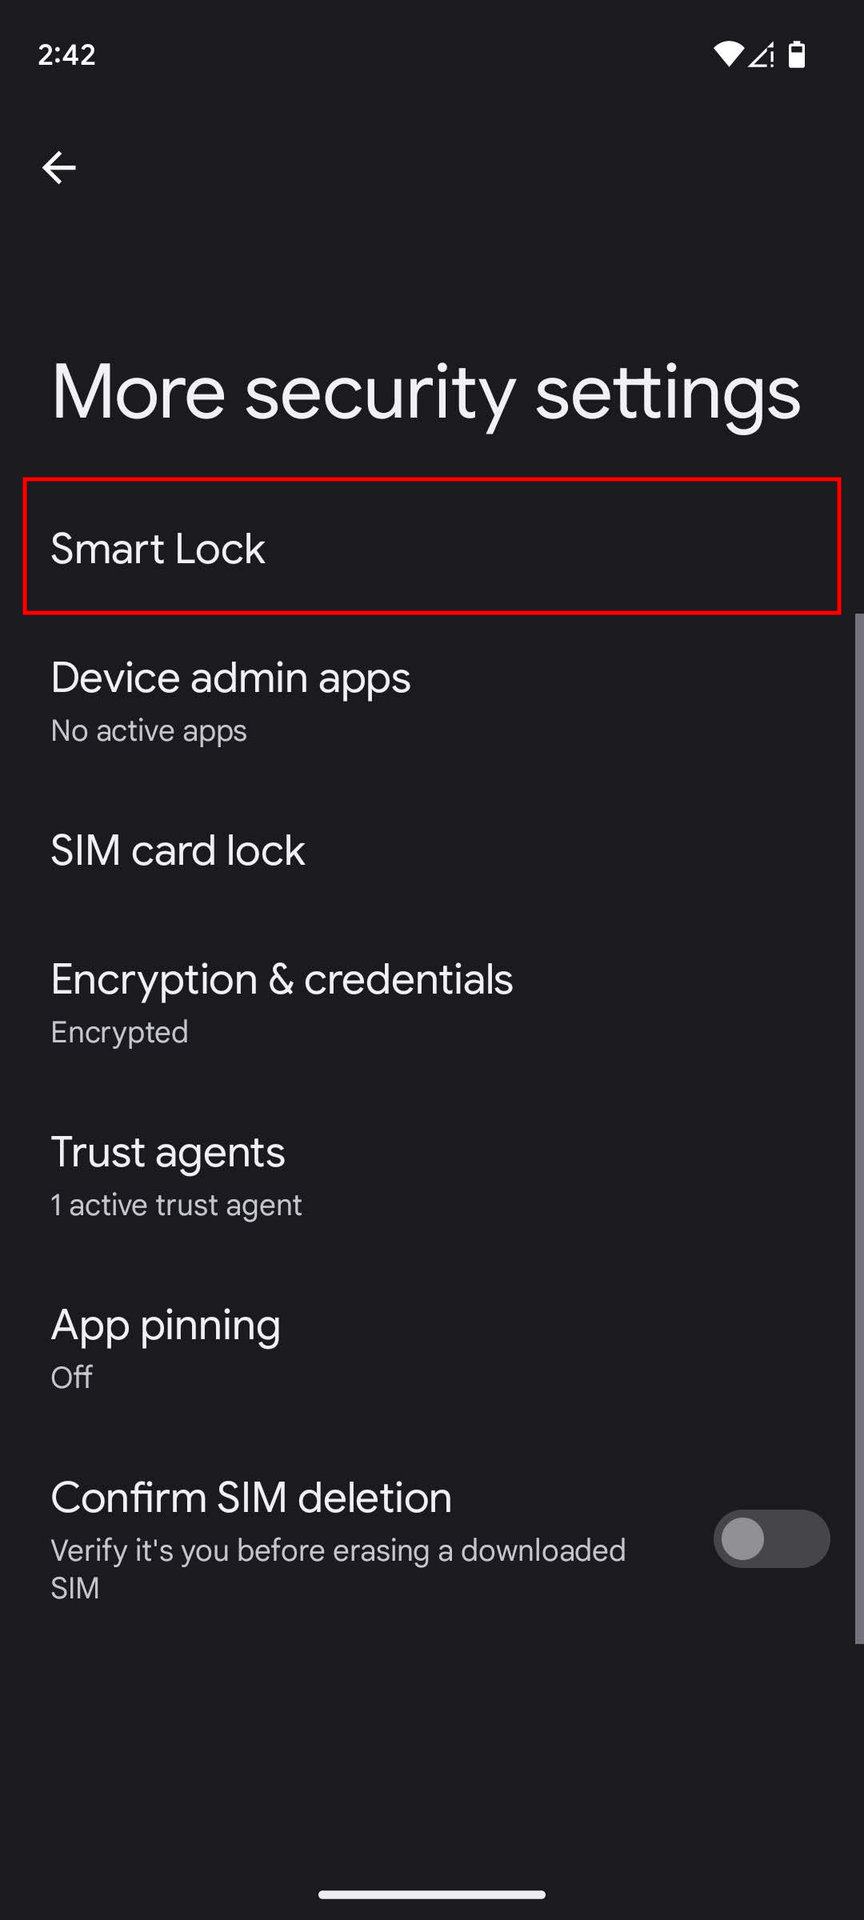 How To Set Up & Use Smart Lock On Android